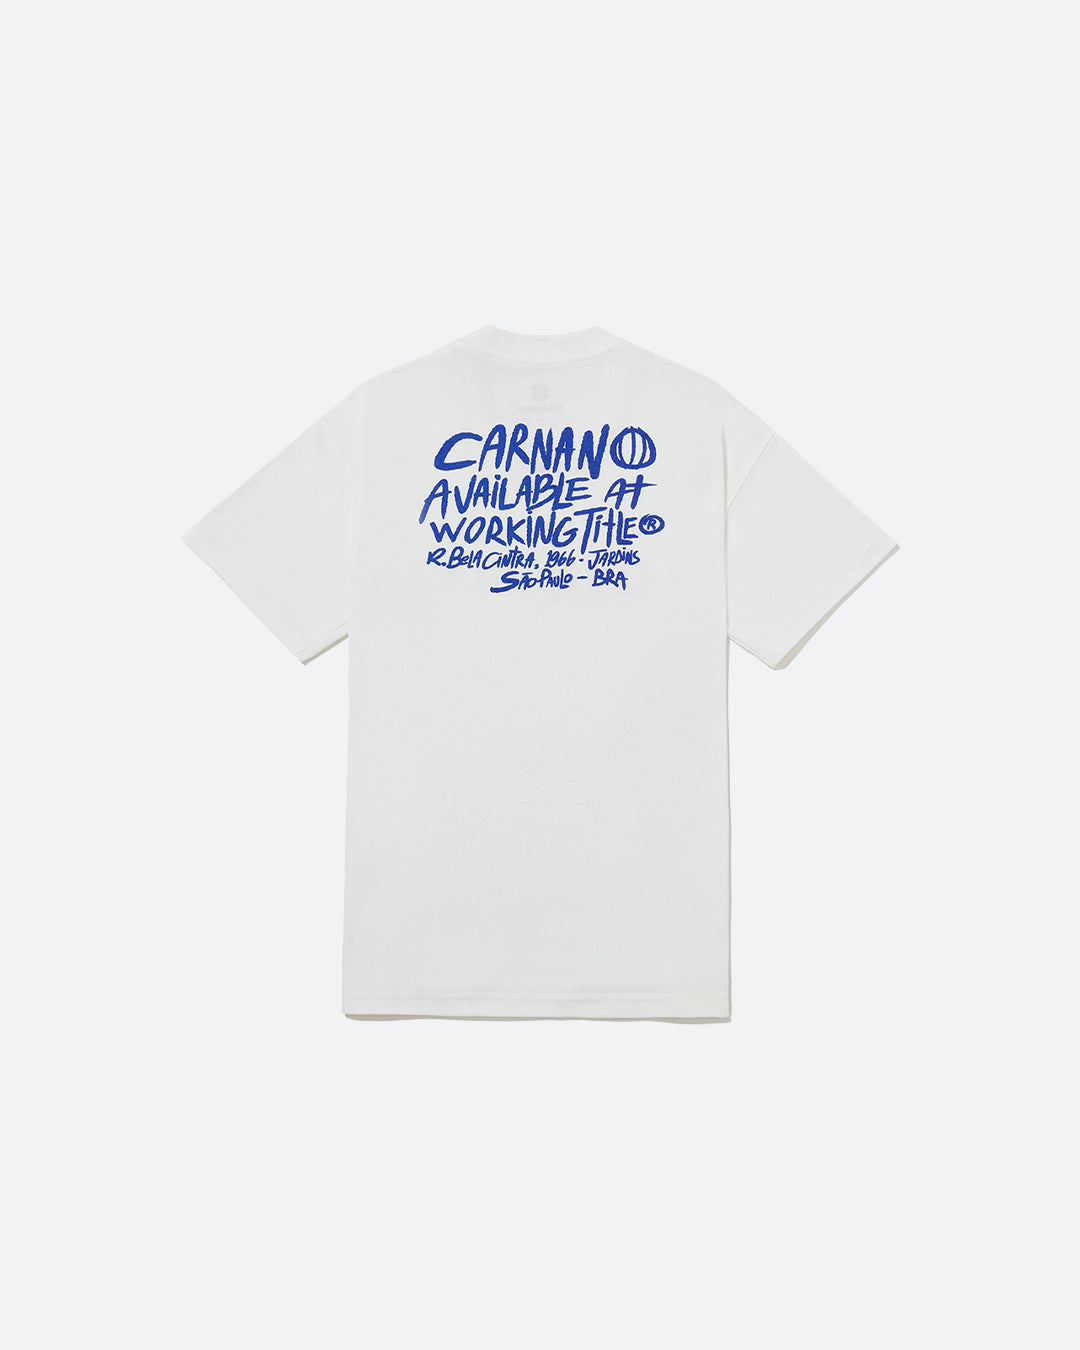 Working Nomads Tee